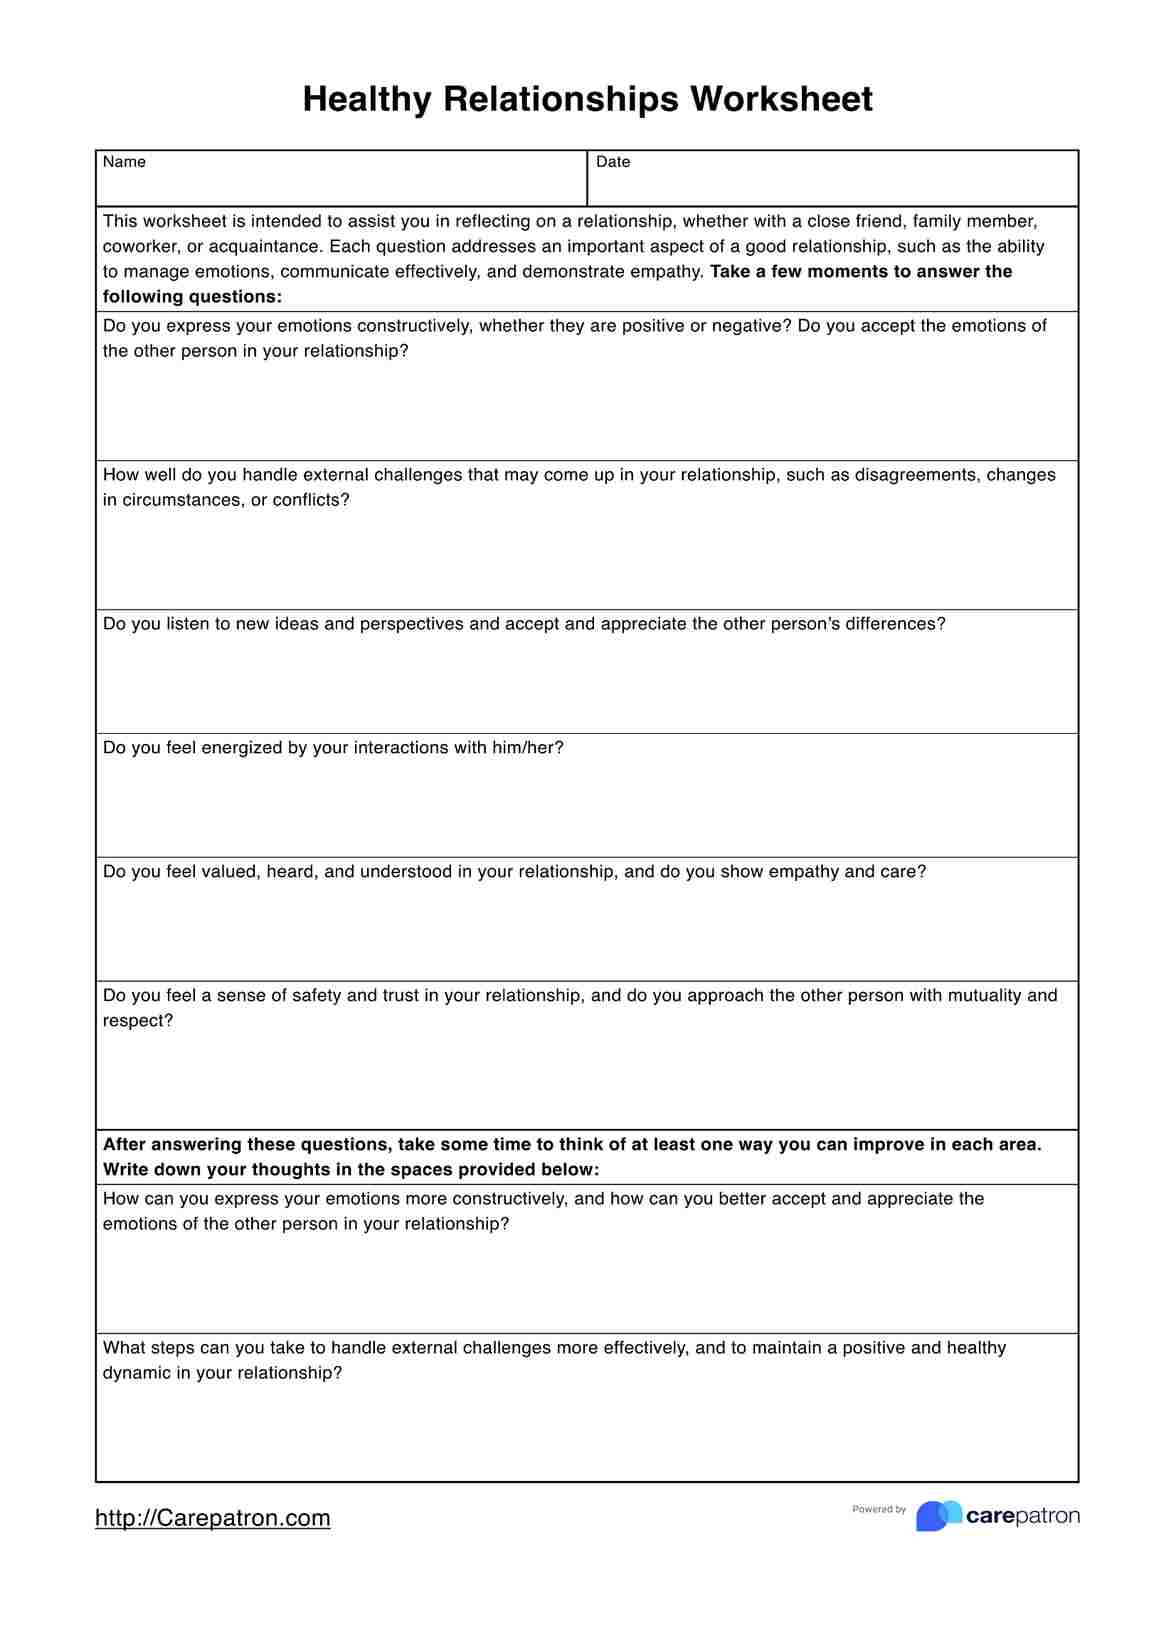 Healthy Relationships Worksheets PDF Example